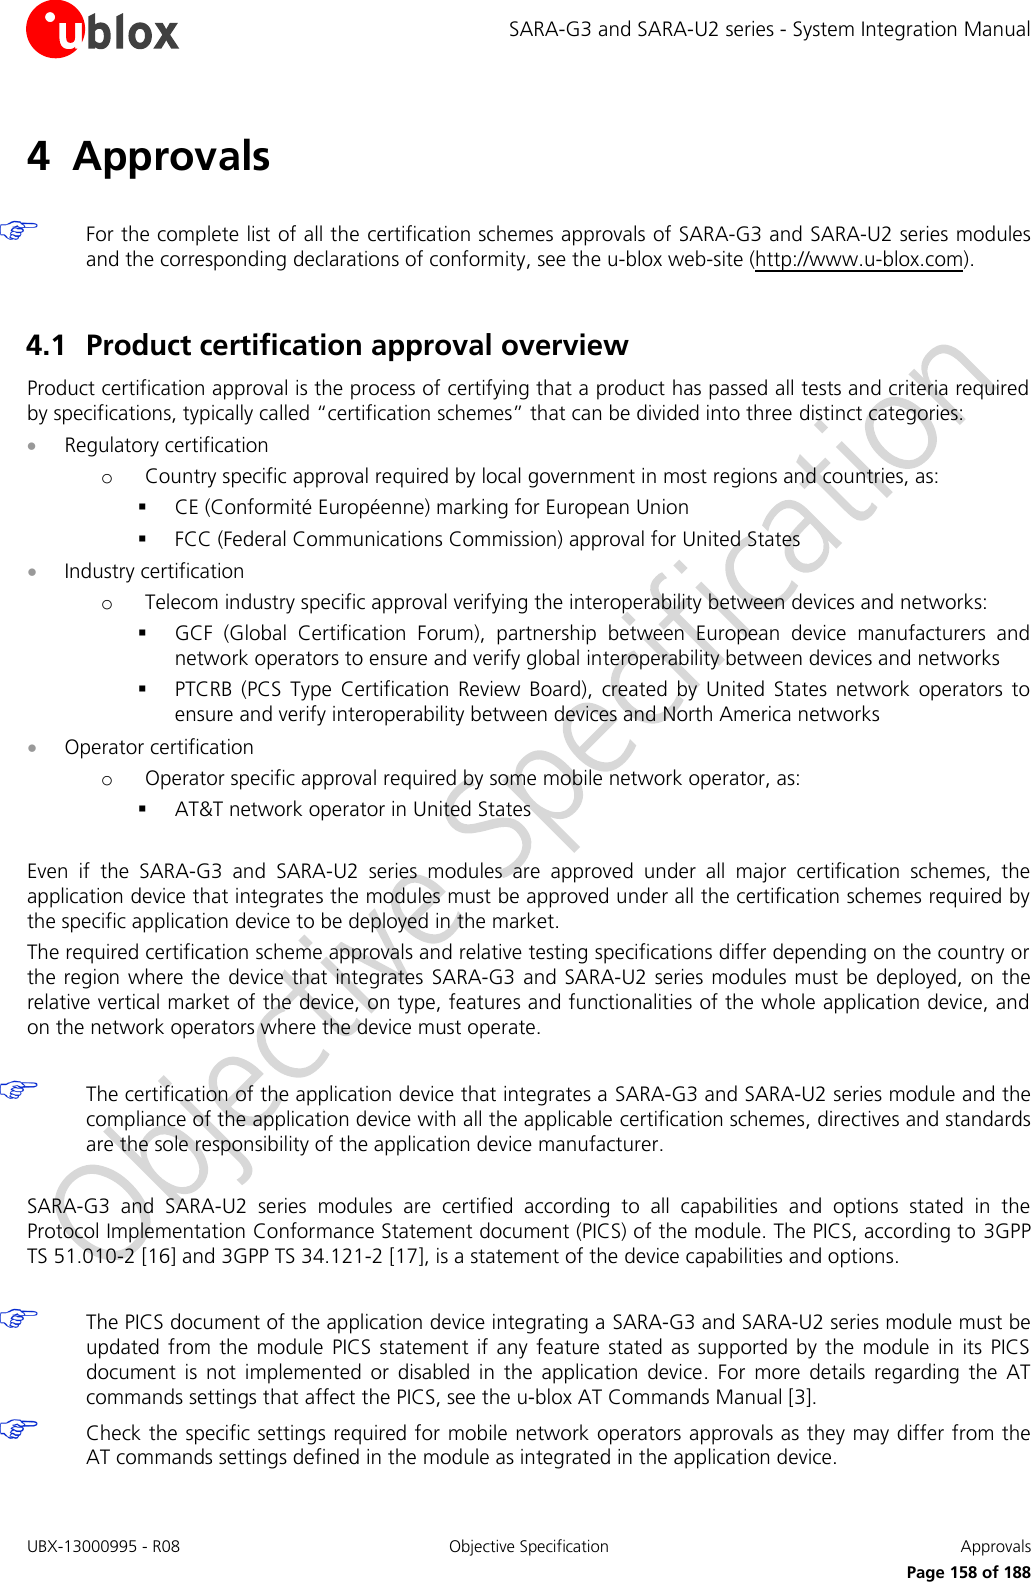 SARA-G3 and SARA-U2 series - System Integration Manual UBX-13000995 - R08  Objective Specification  Approvals Page 158 of 188 4 Approvals For the complete list of all the certification schemes approvals of SARA-G3 and SARA-U2 series modules and the corresponding declarations of conformity, see the u-blox web-site (http://www.u-blox.com). 4.1 Product certification approval overview Product certification approval is the process of certifying that a product has passed all tests and criteria required by specifications, typically called “certification schemes” that can be divided into three distinct categories: Regulatory certificationoCountry specific approval required by local government in most regions and countries, as:CE (Conformité Européenne) marking for European UnionFCC (Federal Communications Commission) approval for United StatesIndustry certificationoTelecom industry specific approval verifying the interoperability between devices and networks:GCF  (Global  Certification  Forum),  partnership  between  European  device  manufacturers  andnetwork operators to ensure and verify global interoperability between devices and networksPTCRB  (PCS  Type  Certification  Review  Board),  created  by  United  States  network  operators  toensure and verify interoperability between devices and North America networksOperator certificationoOperator specific approval required by some mobile network operator, as:AT&amp;T network operator in United StatesEven  if  the  SARA-G3  and  SARA-U2  series  modules  are  approved  under  all  major  certification  schemes,  the application device that integrates the modules must be approved under all the certification schemes required by the specific application device to be deployed in the market. The required certification scheme approvals and relative testing specifications differ depending on the country or the region where the  device that integrates  SARA-G3 and SARA-U2 series modules must be deployed, on the relative vertical market of the device, on type, features and functionalities of the whole application device, and on the network operators where the device must operate. The certification of the application device that integrates a SARA-G3 and SARA-U2 series module and the compliance of the application device with all the applicable certification schemes, directives and standards are the sole responsibility of the application device manufacturer. SARA-G3  and  SARA-U2  series  modules  are  certified  according  to  all  capabilities  and  options  stated  in  the Protocol Implementation Conformance Statement document (PICS) of the module. The PICS, according to 3GPP TS 51.010-2 [16] and 3GPP TS 34.121-2 [17], is a statement of the device capabilities and options. The PICS document of the application device integrating a SARA-G3 and SARA-U2 series module must be updated  from the  module  PICS  statement  if any feature  stated  as supported by  the  module  in its PICS document  is  not  implemented  or  disabled  in  the  application  device.  For  more  details  regarding  the  AT commands settings that affect the PICS, see the u-blox AT Commands Manual [3]. Check the specific settings required for mobile network operators approvals as they may differ from the AT commands settings defined in the module as integrated in the application device. 